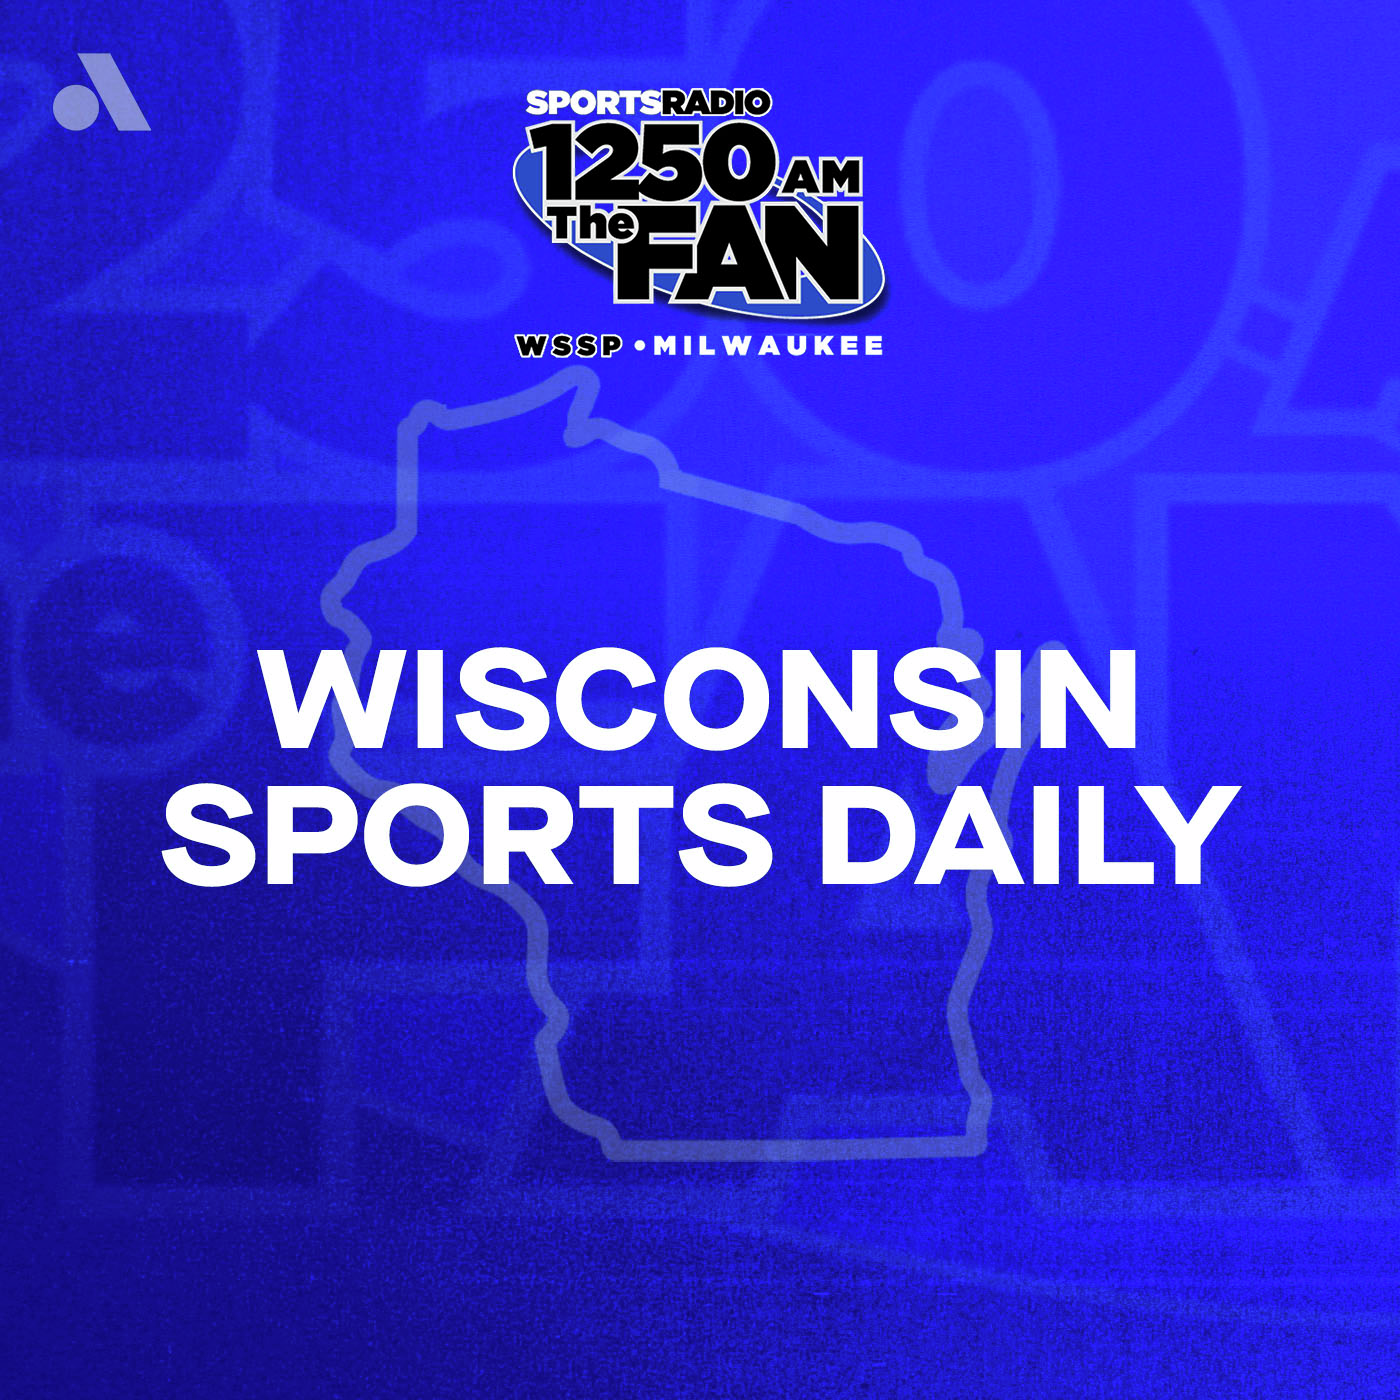 Wednesday, June 12th: Former Brewers and Bucks Play-by-Play Guy Jim Paschke Joins Wisconsin Sports Daily!